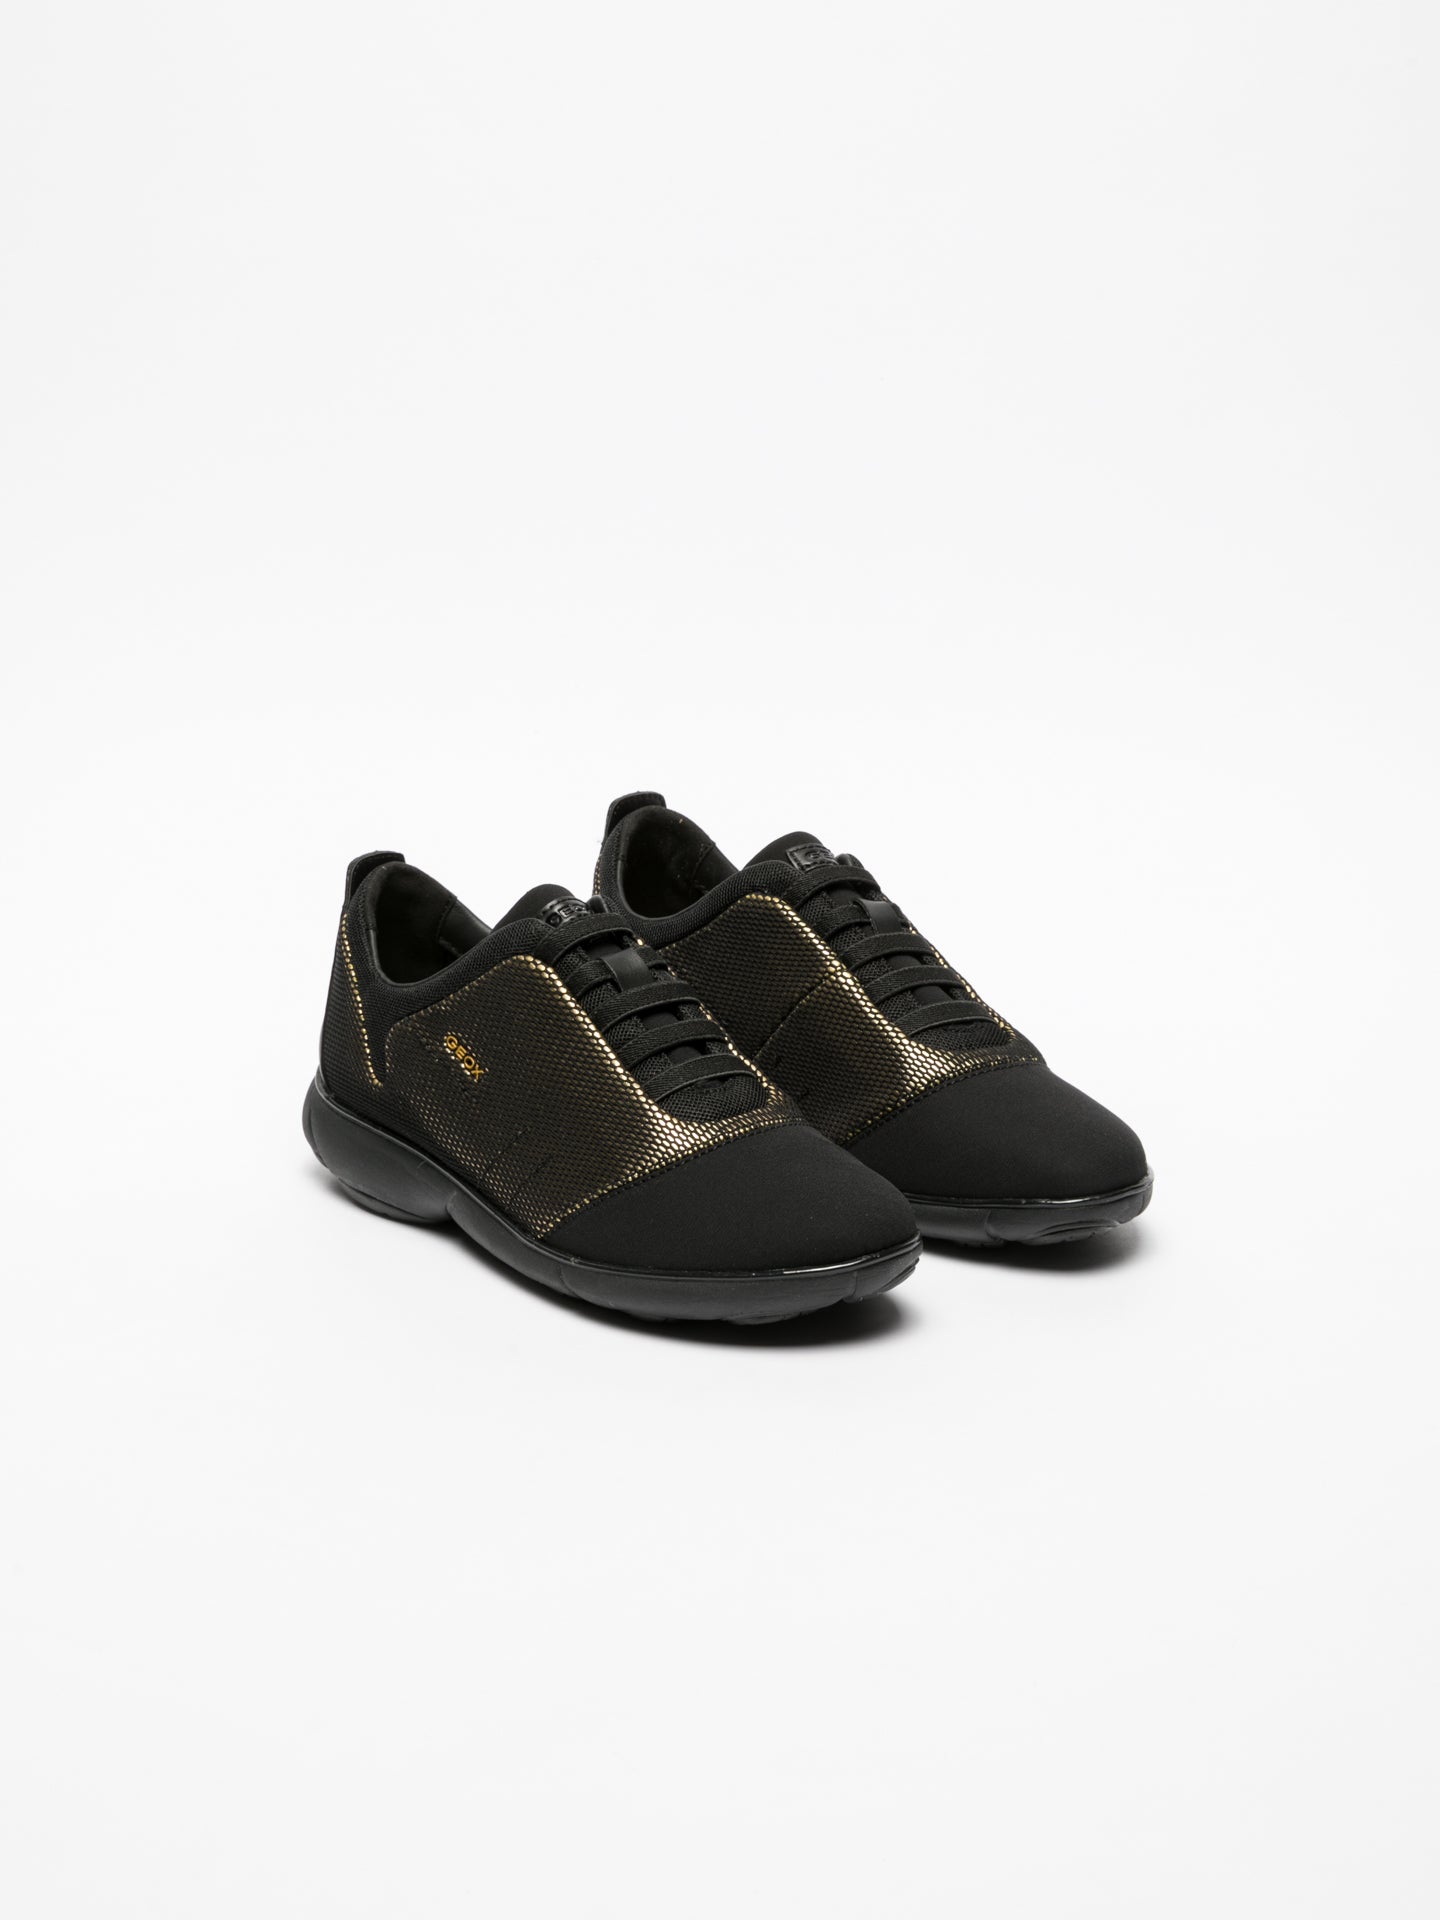 Geox Black Lace-up Trainers